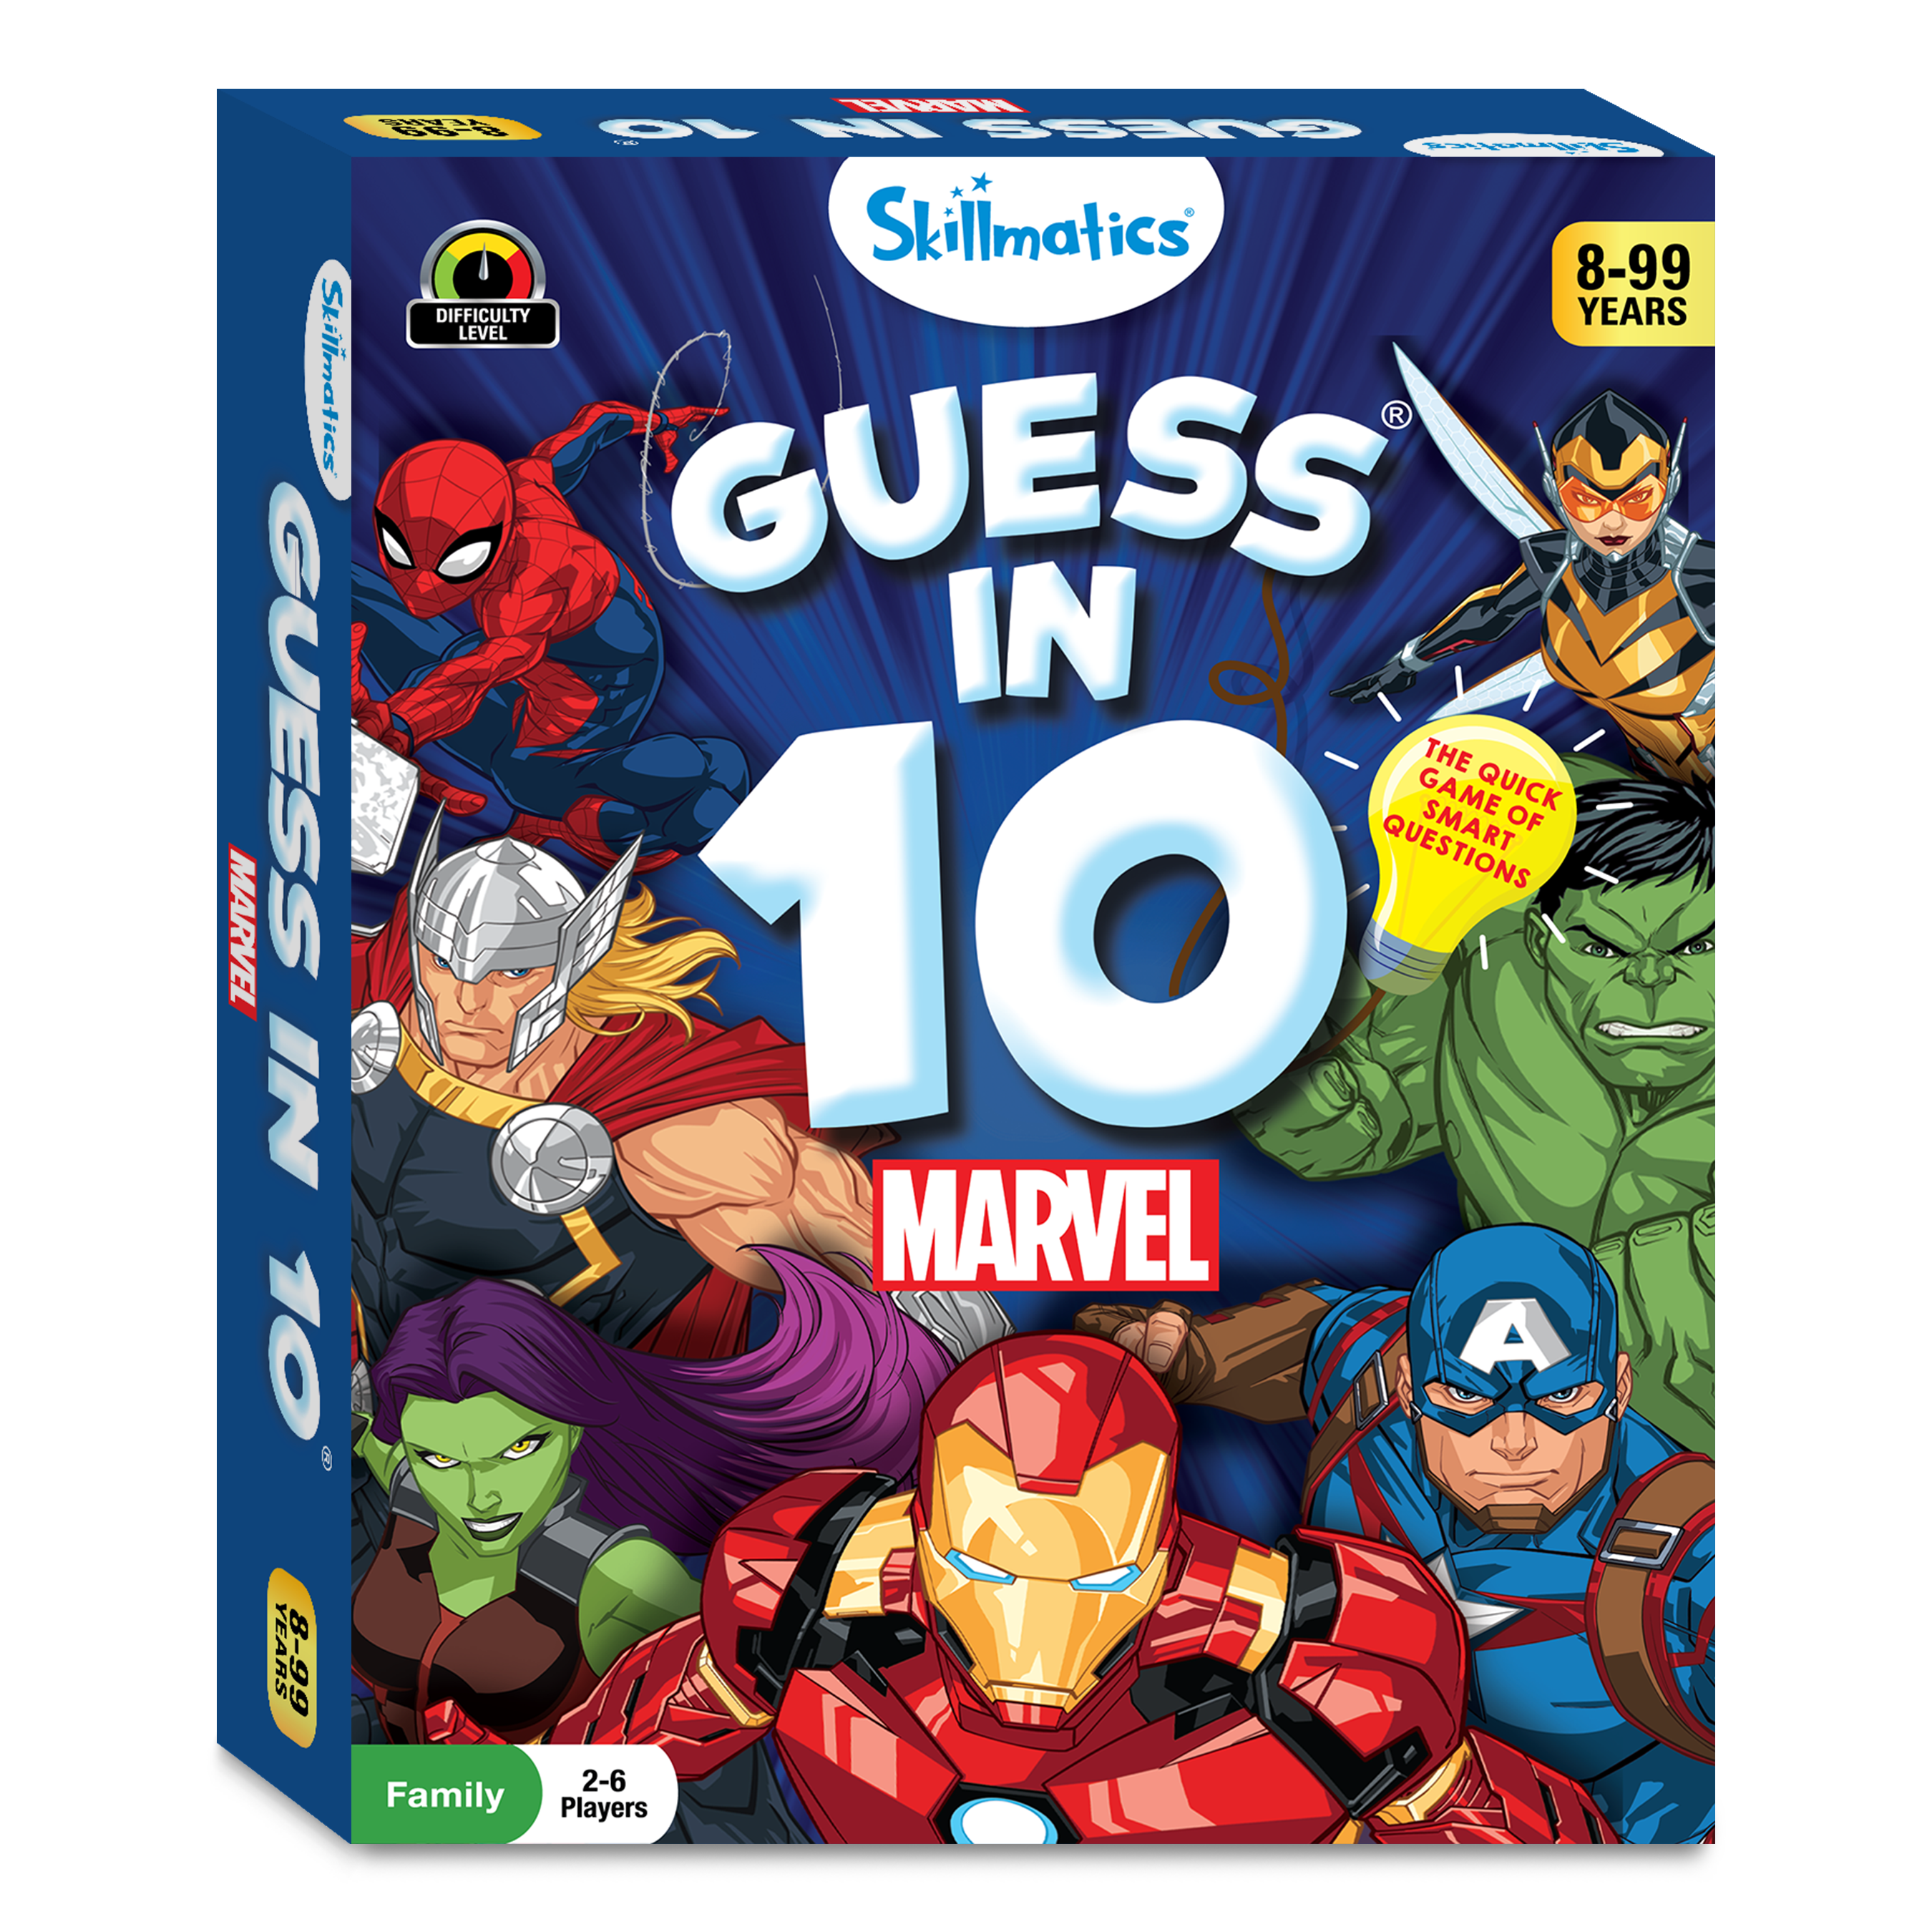 Guess in 10 - Marvel Edition